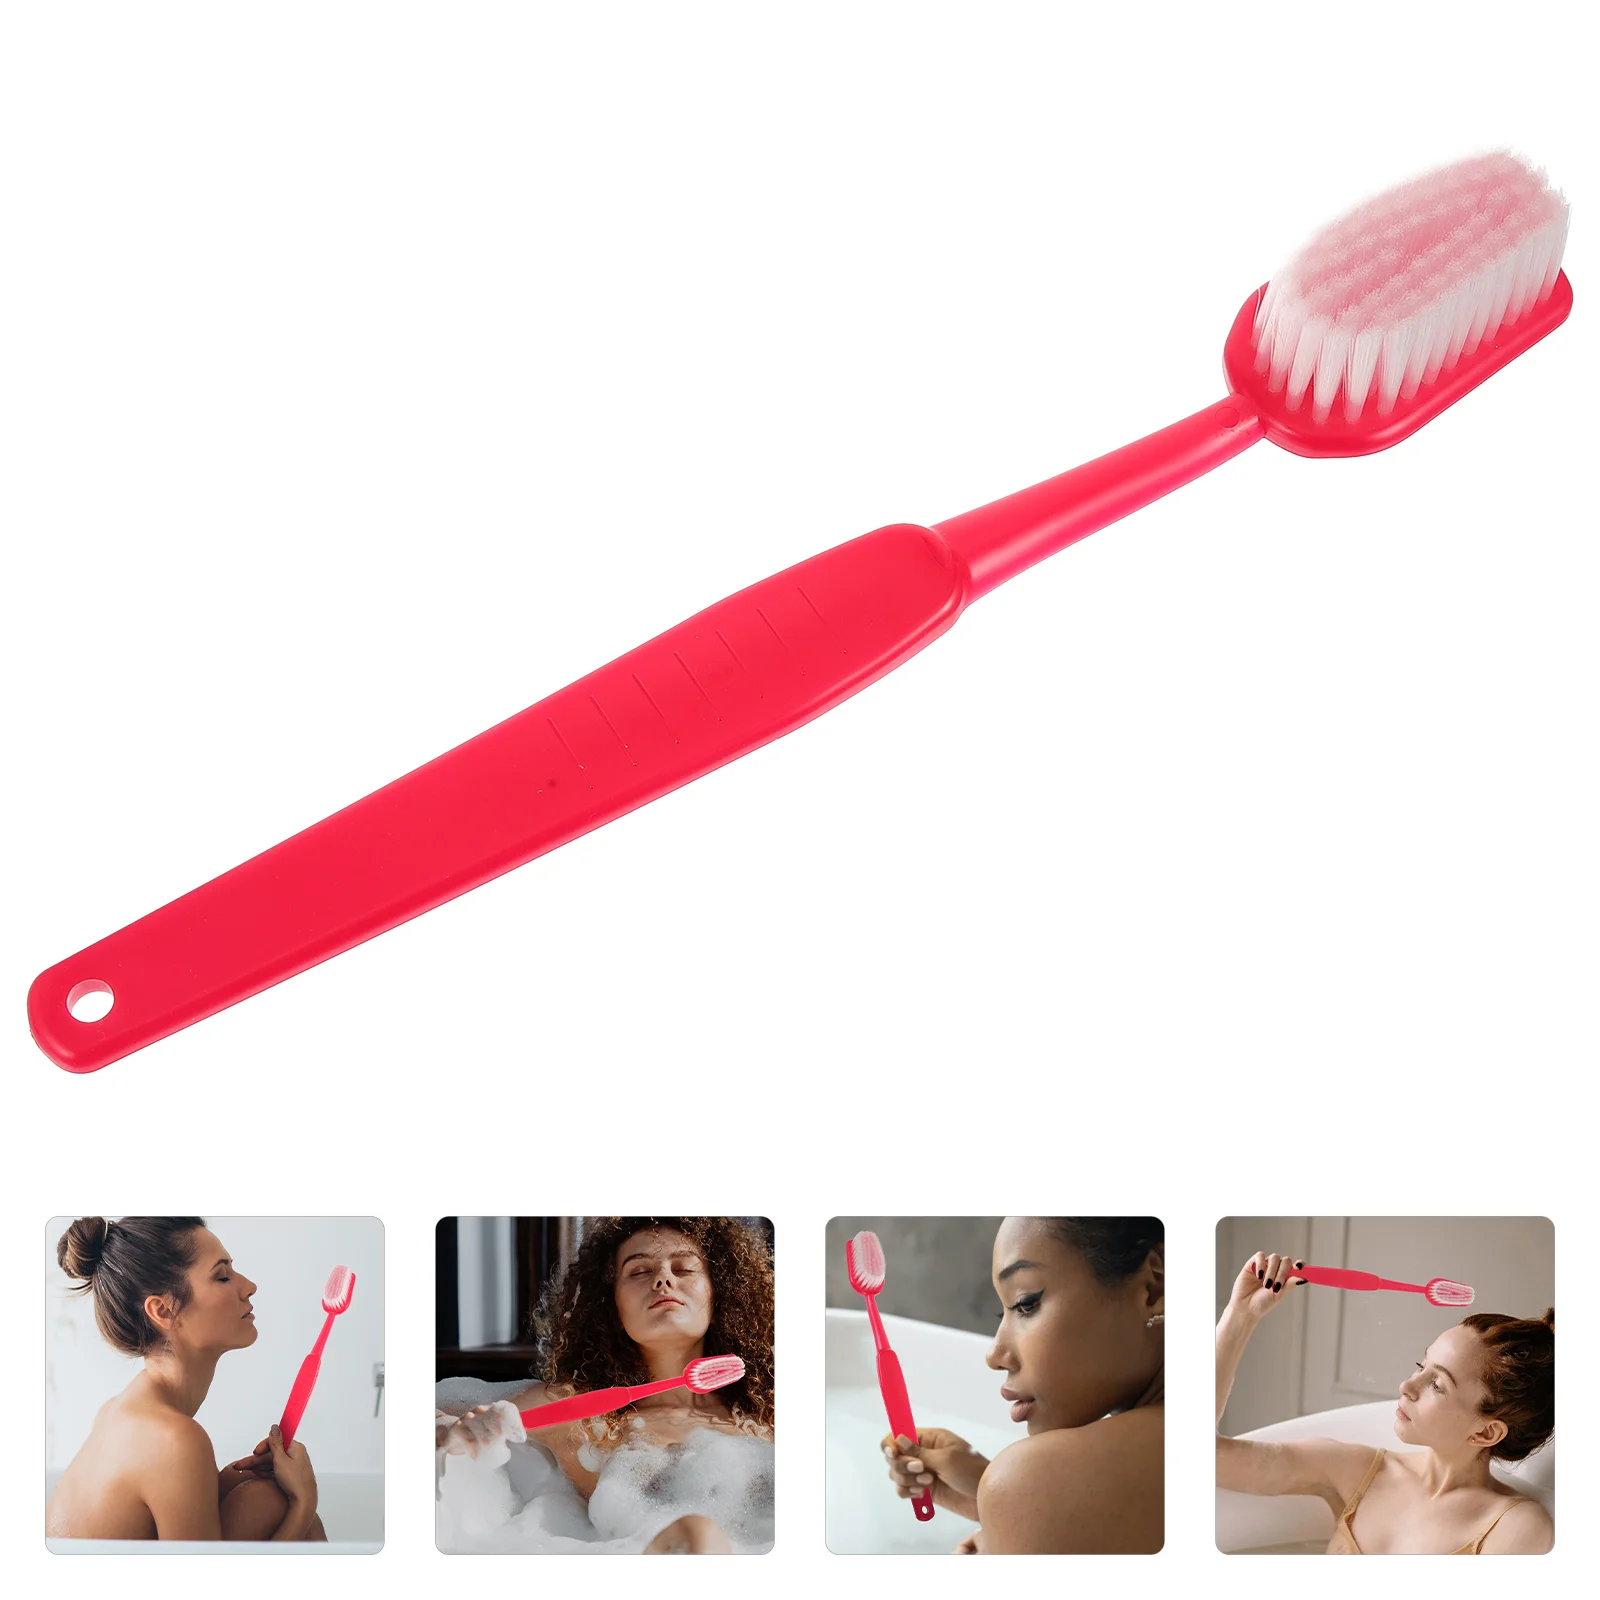 

Creative Bath Brush Exfoliating Shower Lotion Applicators Bathroom Supplies Scrubber Washer Cleaning